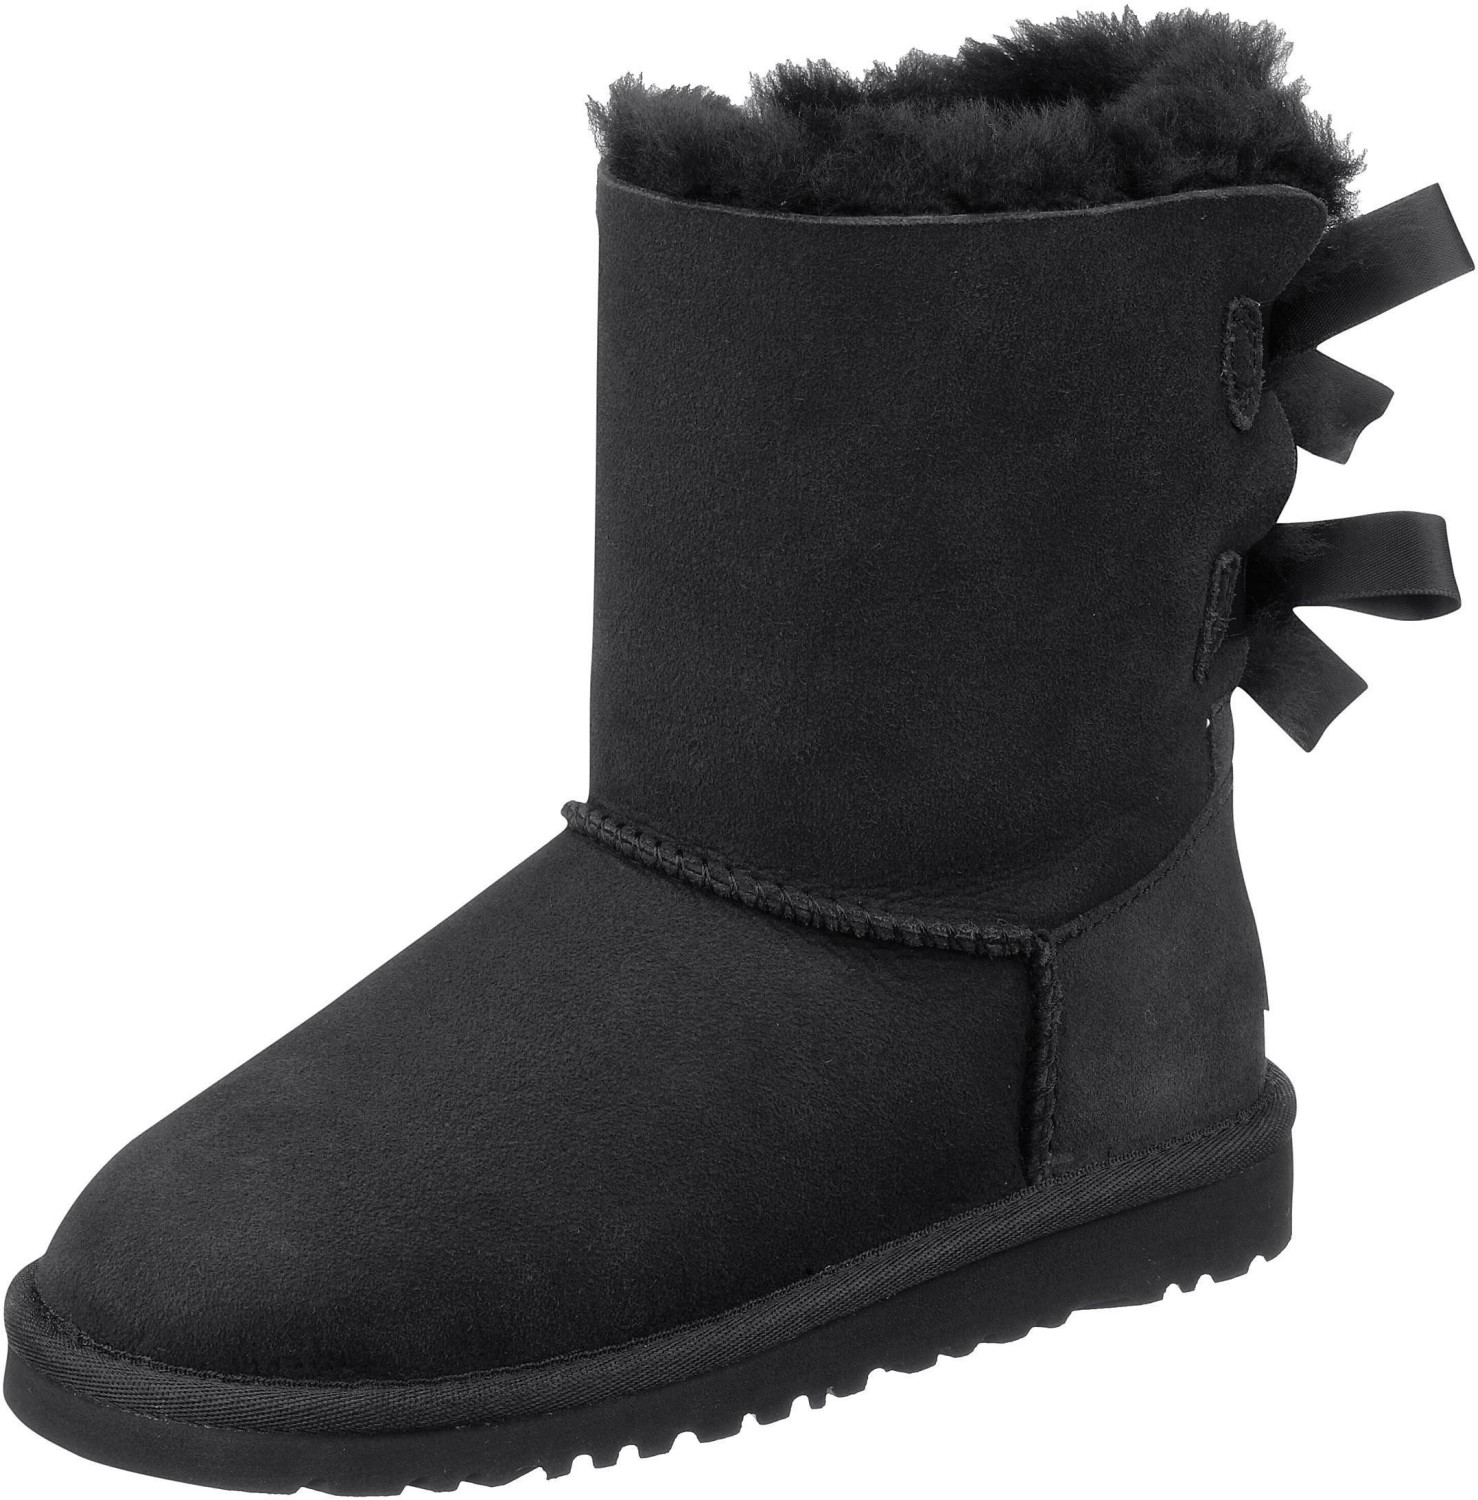 Buy UGG Bailey Bow II Black from £184.60 (Today) – Best Deals on idealo ...